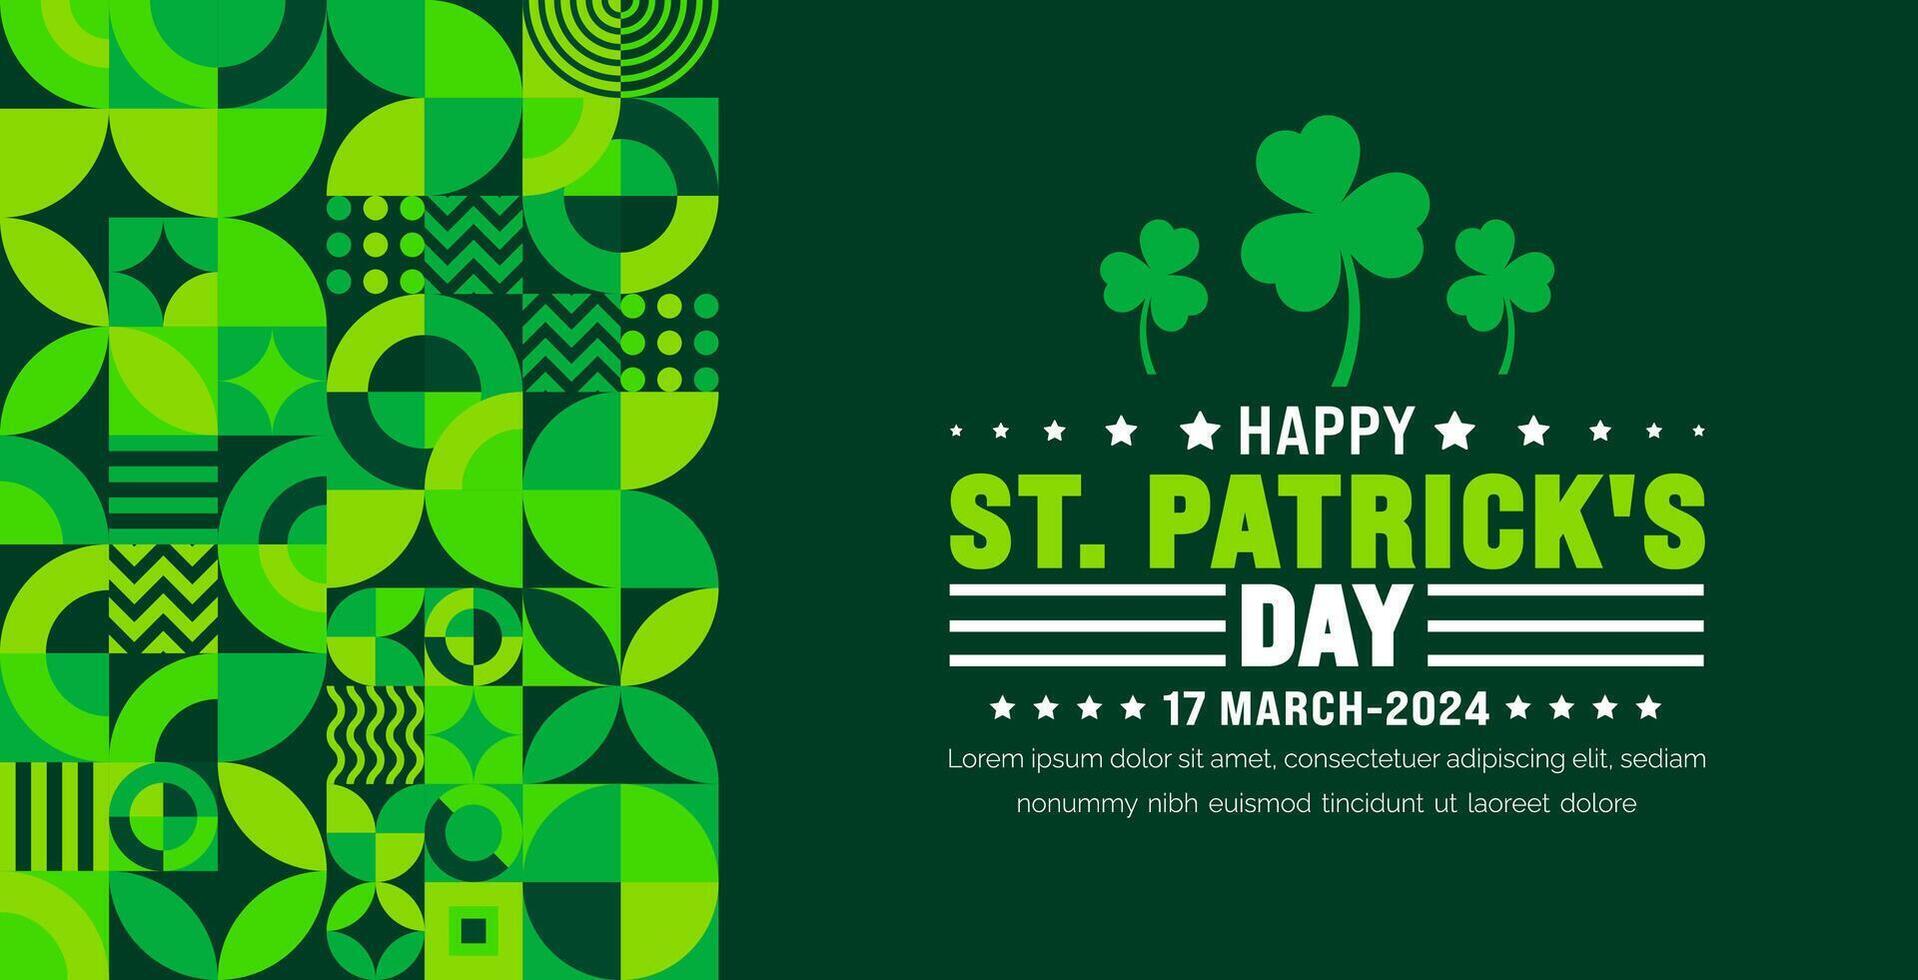 17 March is Happy St. Patrick's day geometric shape pattern  background with green leaves background template. St Patrick day or saint Patrick day 2024 banner. vector